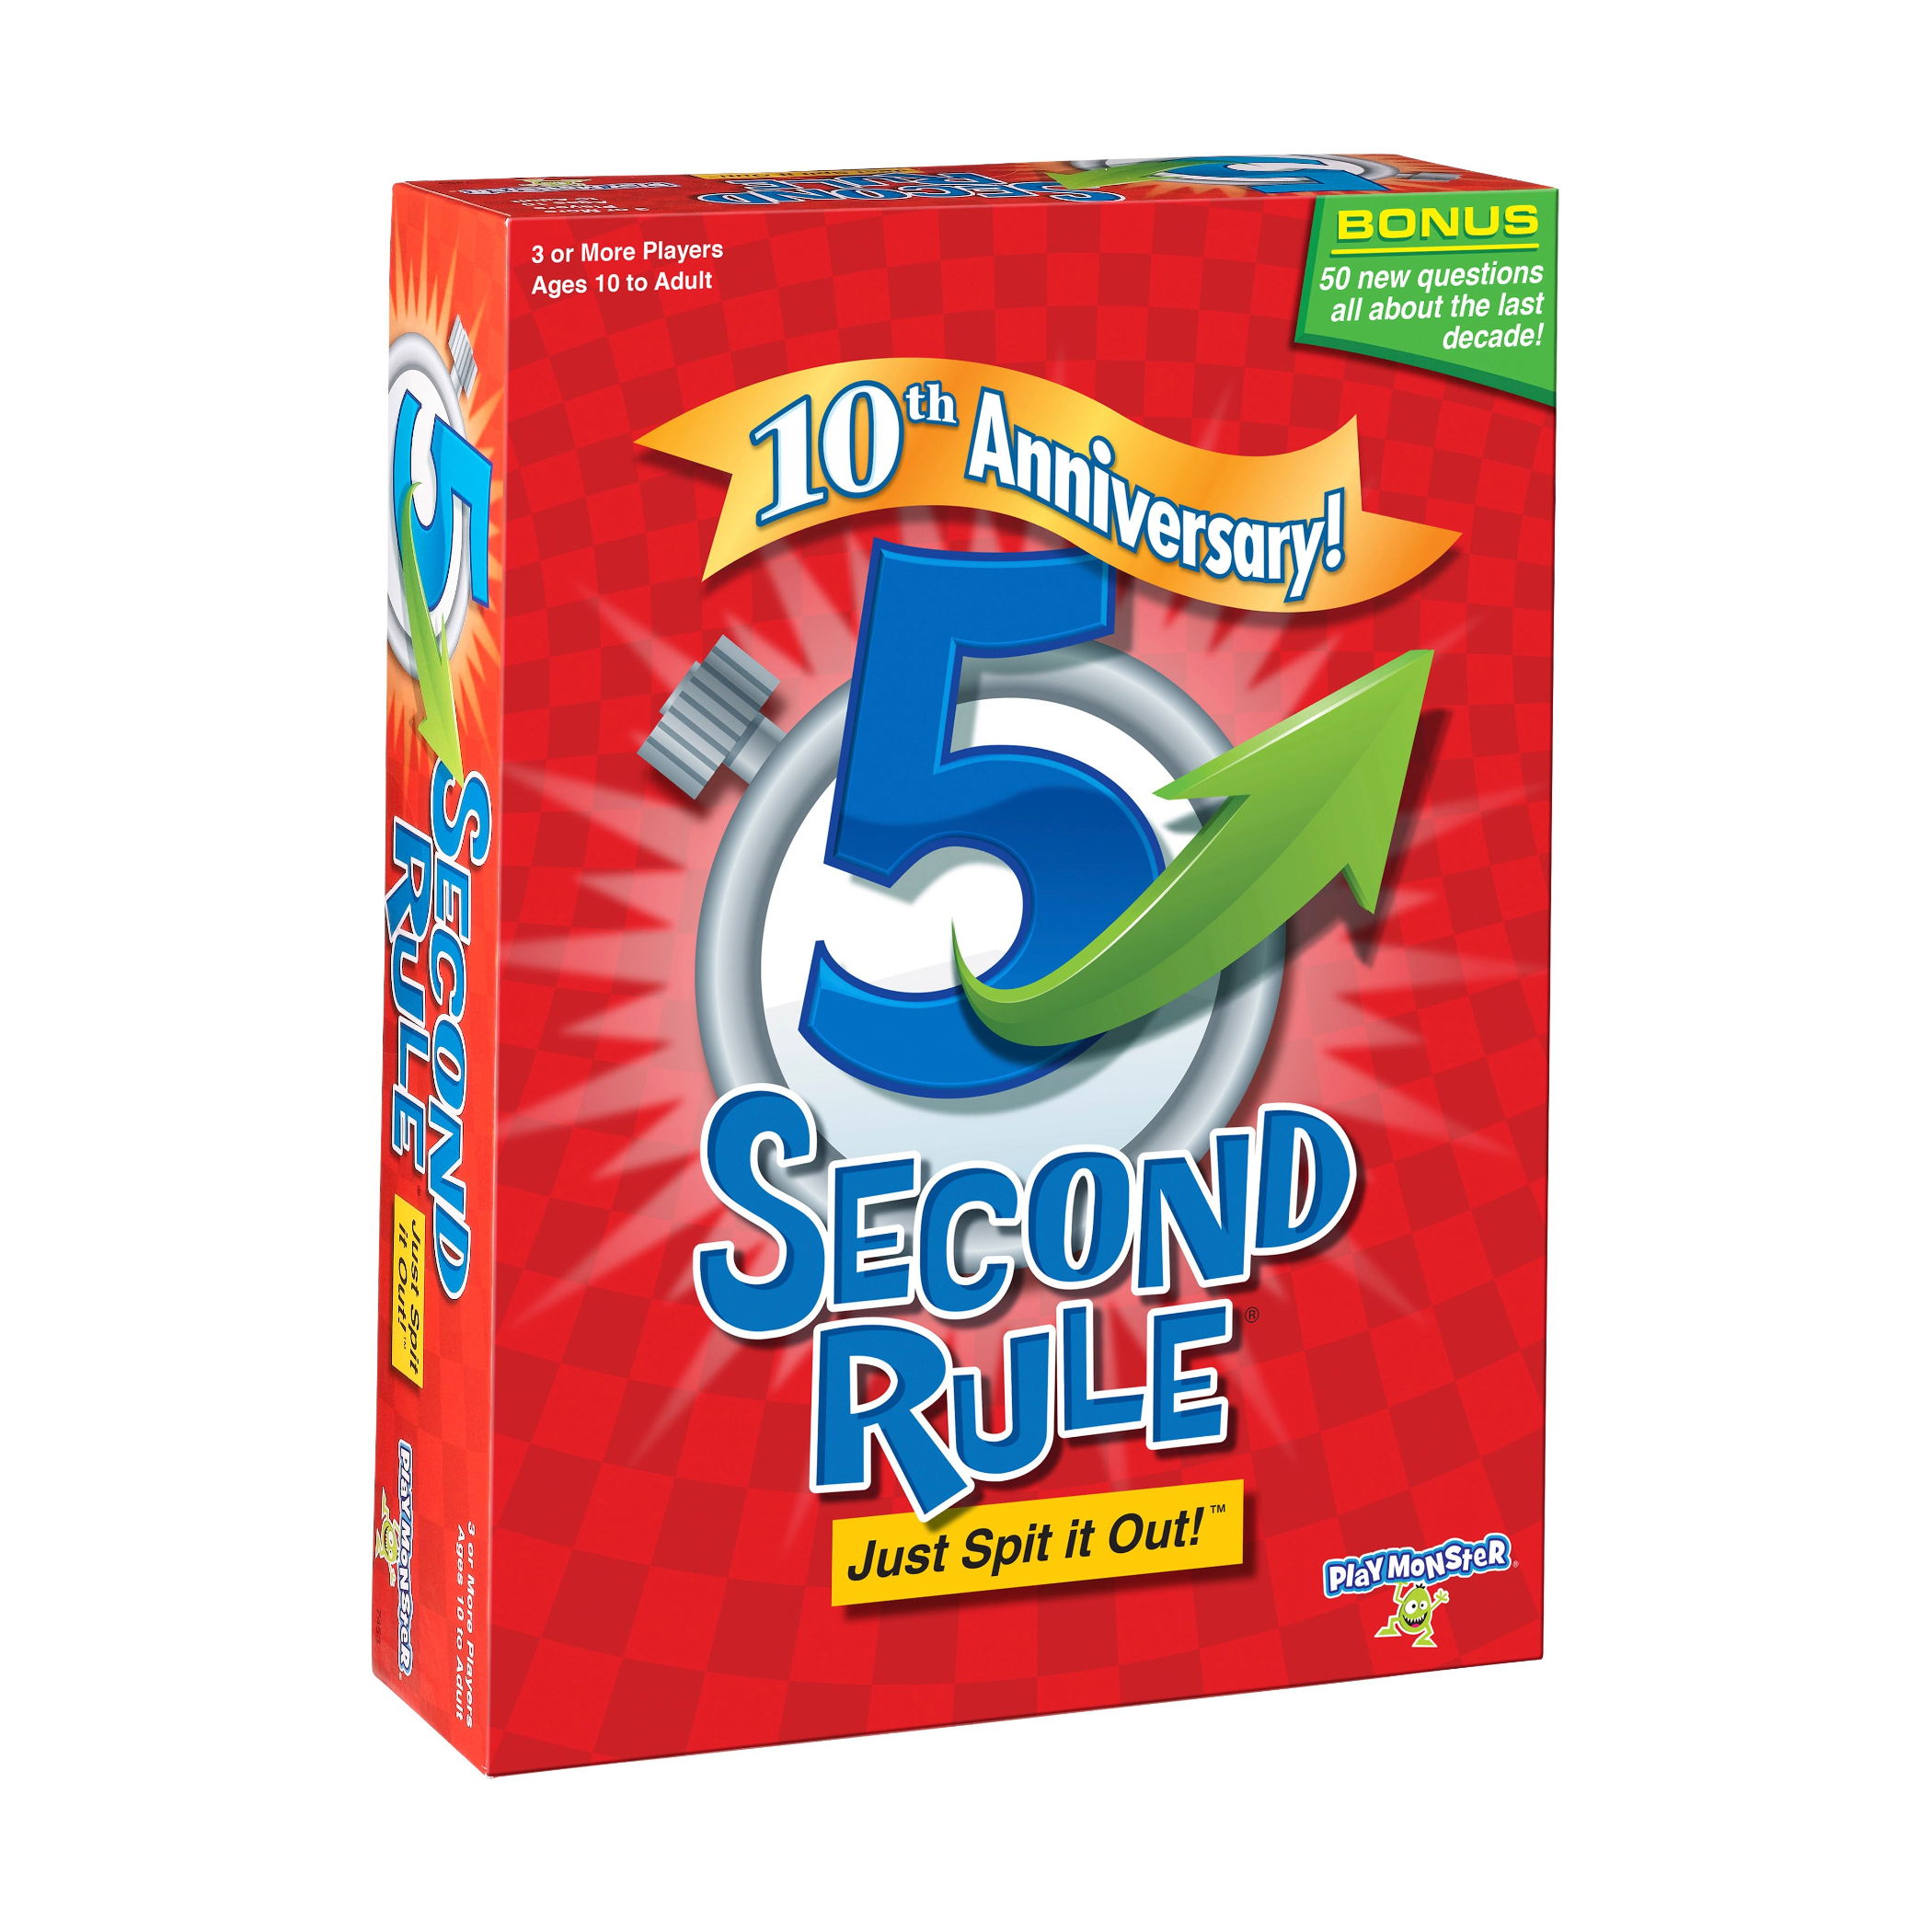 PlayMonster 5 Second Rule - 10th Anniversary Edition - image 1 of 5